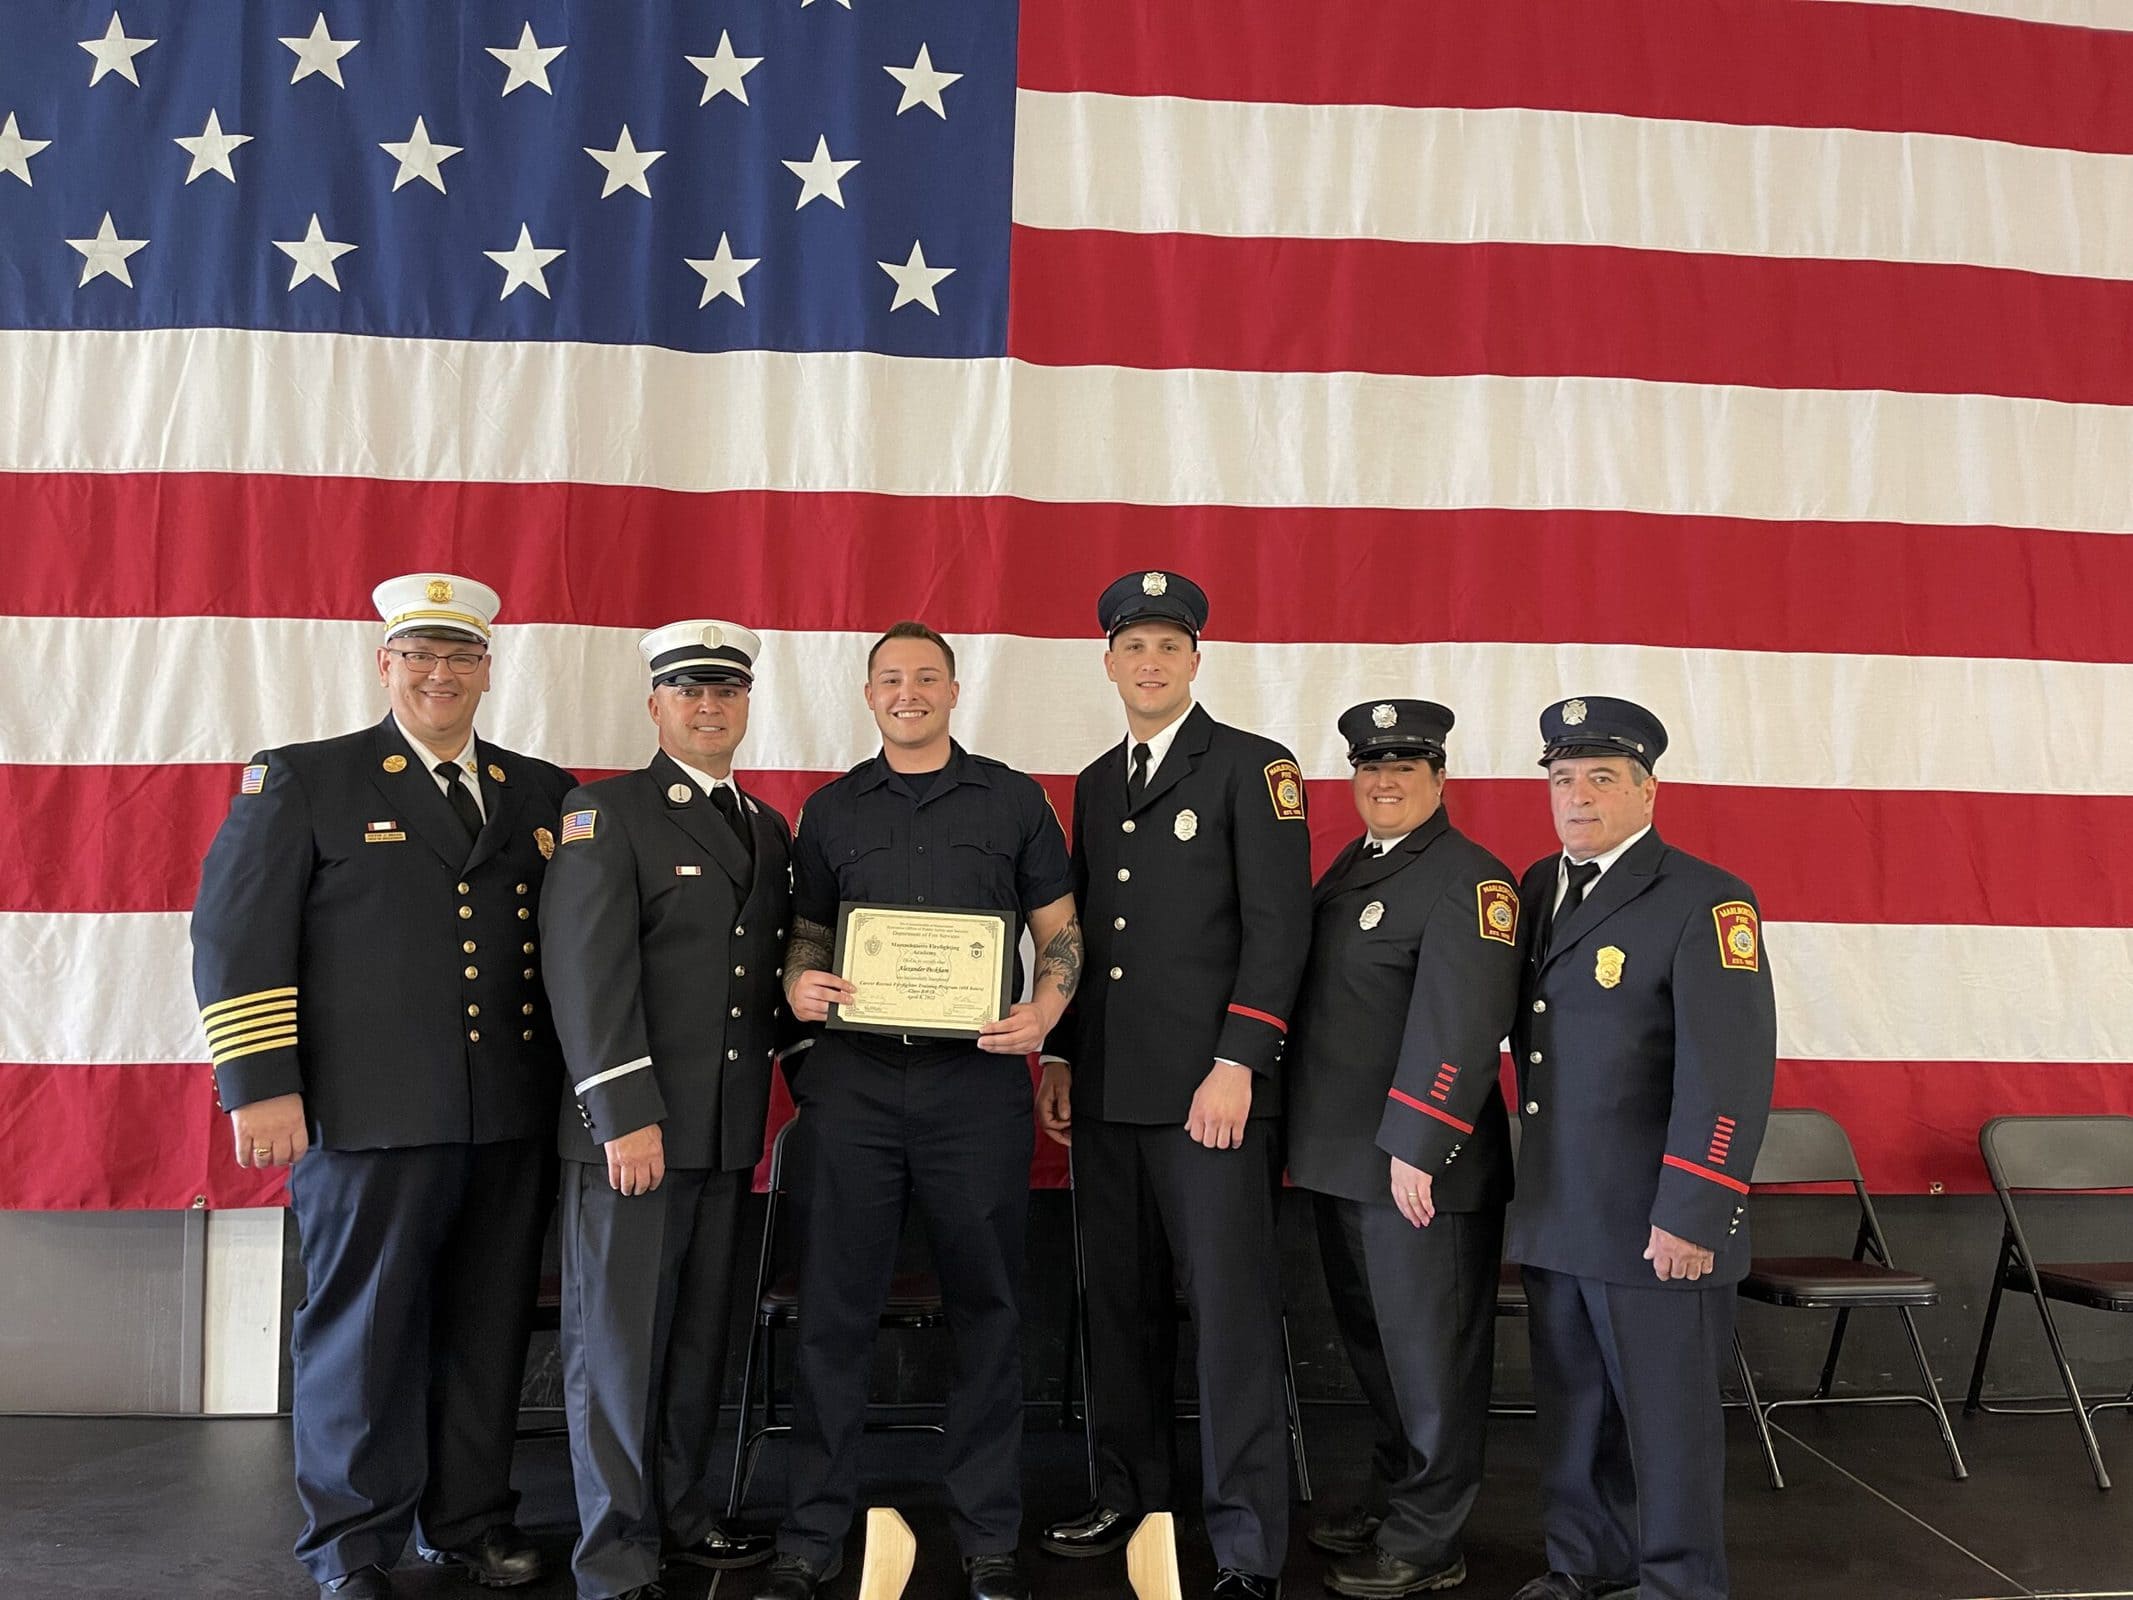 Marlborough Fire Department welcomes two new firefighters as one retires